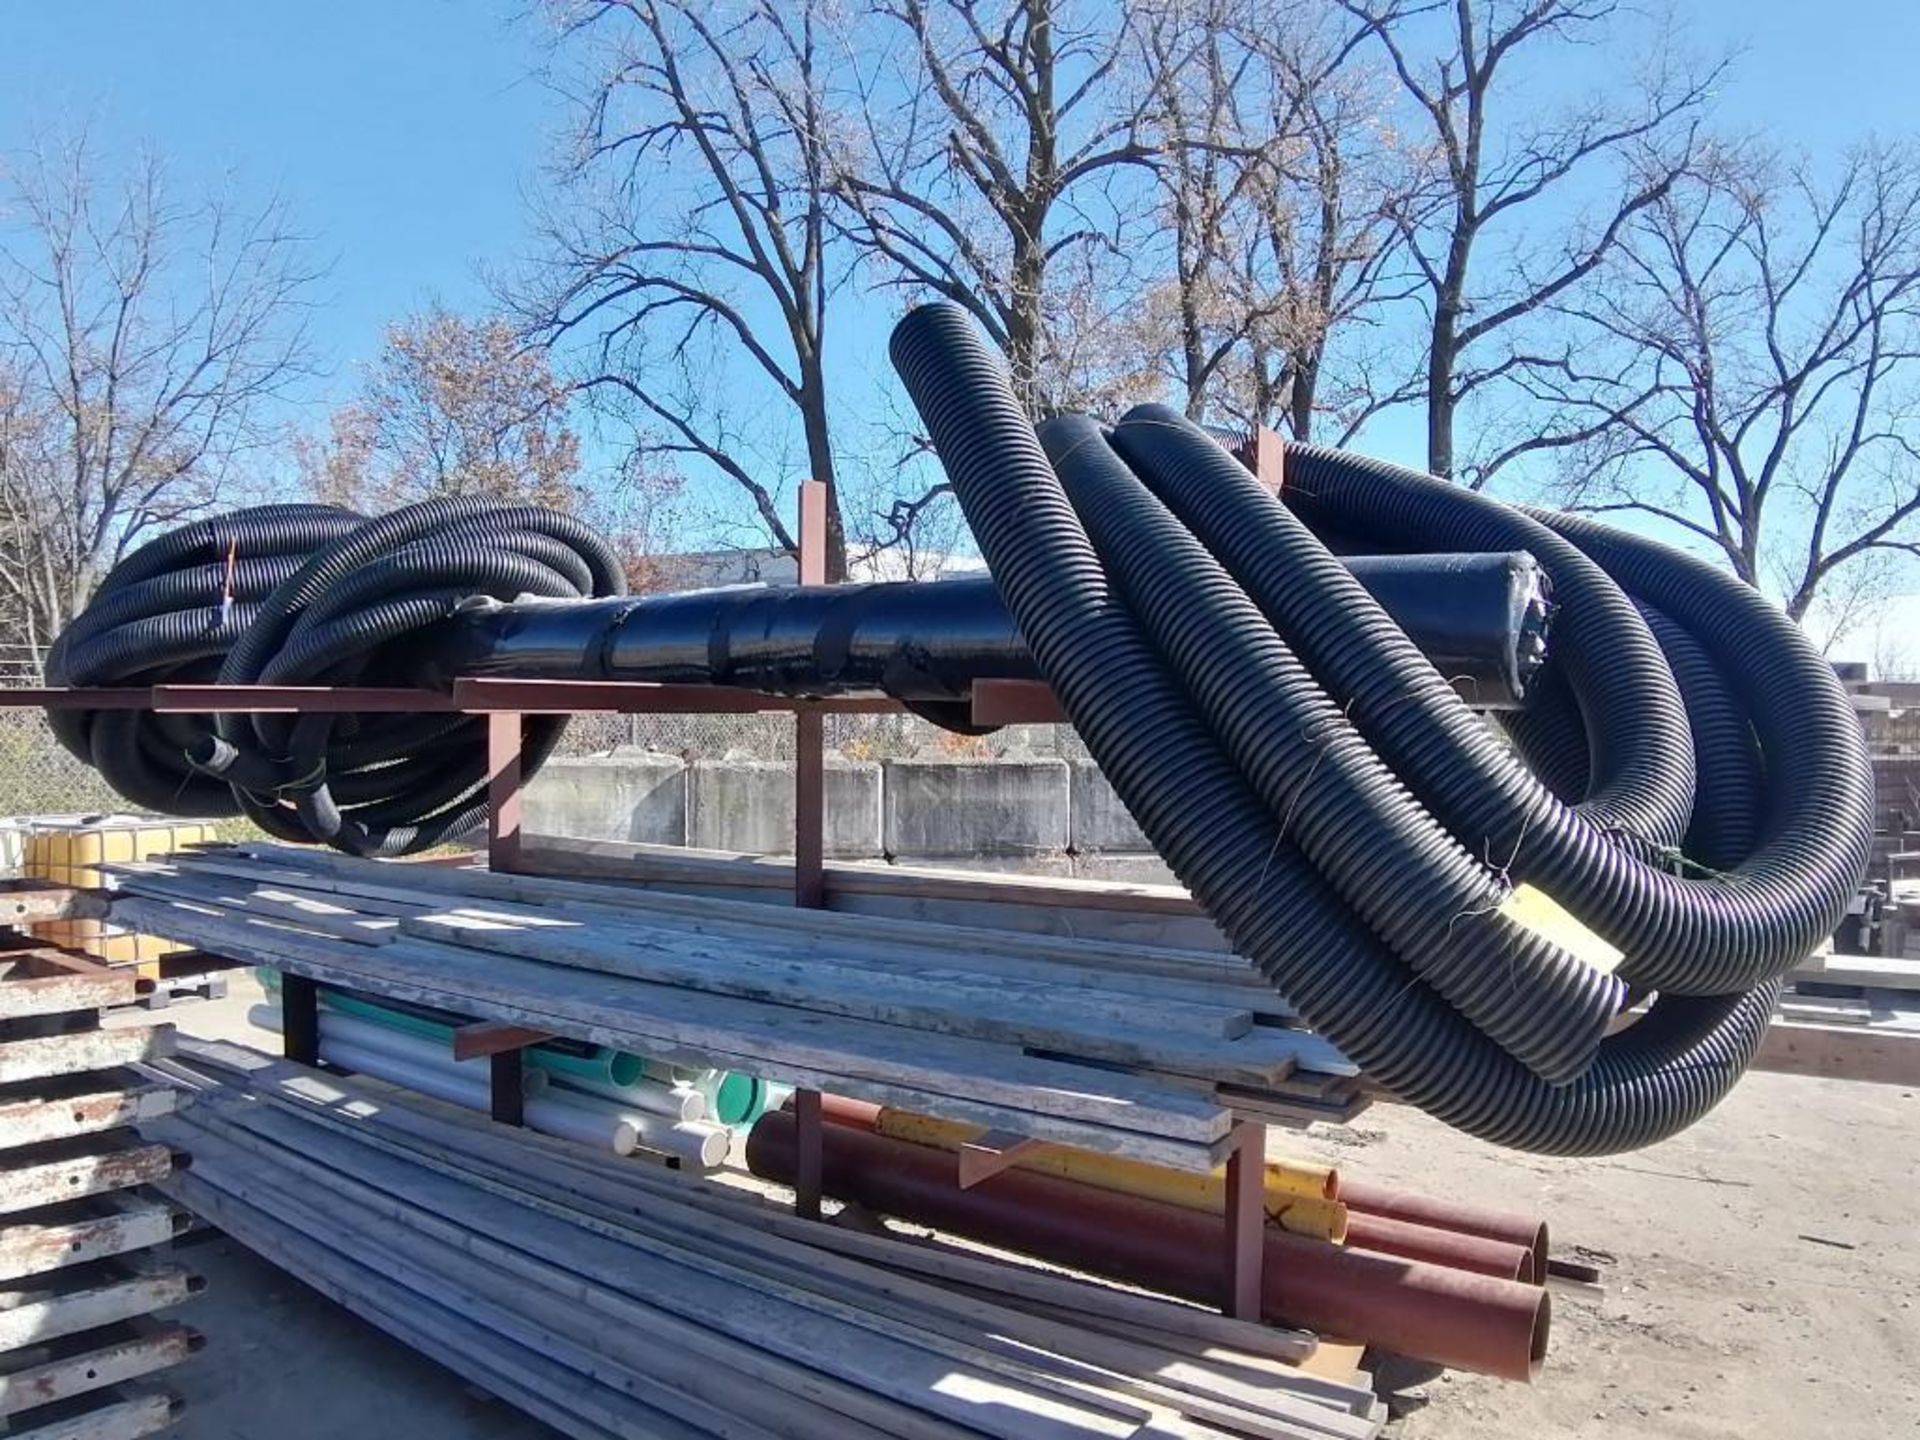 Lot of (3) Rolls of Corrugated Drainage Pipes & (1) Roll of Tencate Mirafi 140N/12.5/60. Located in